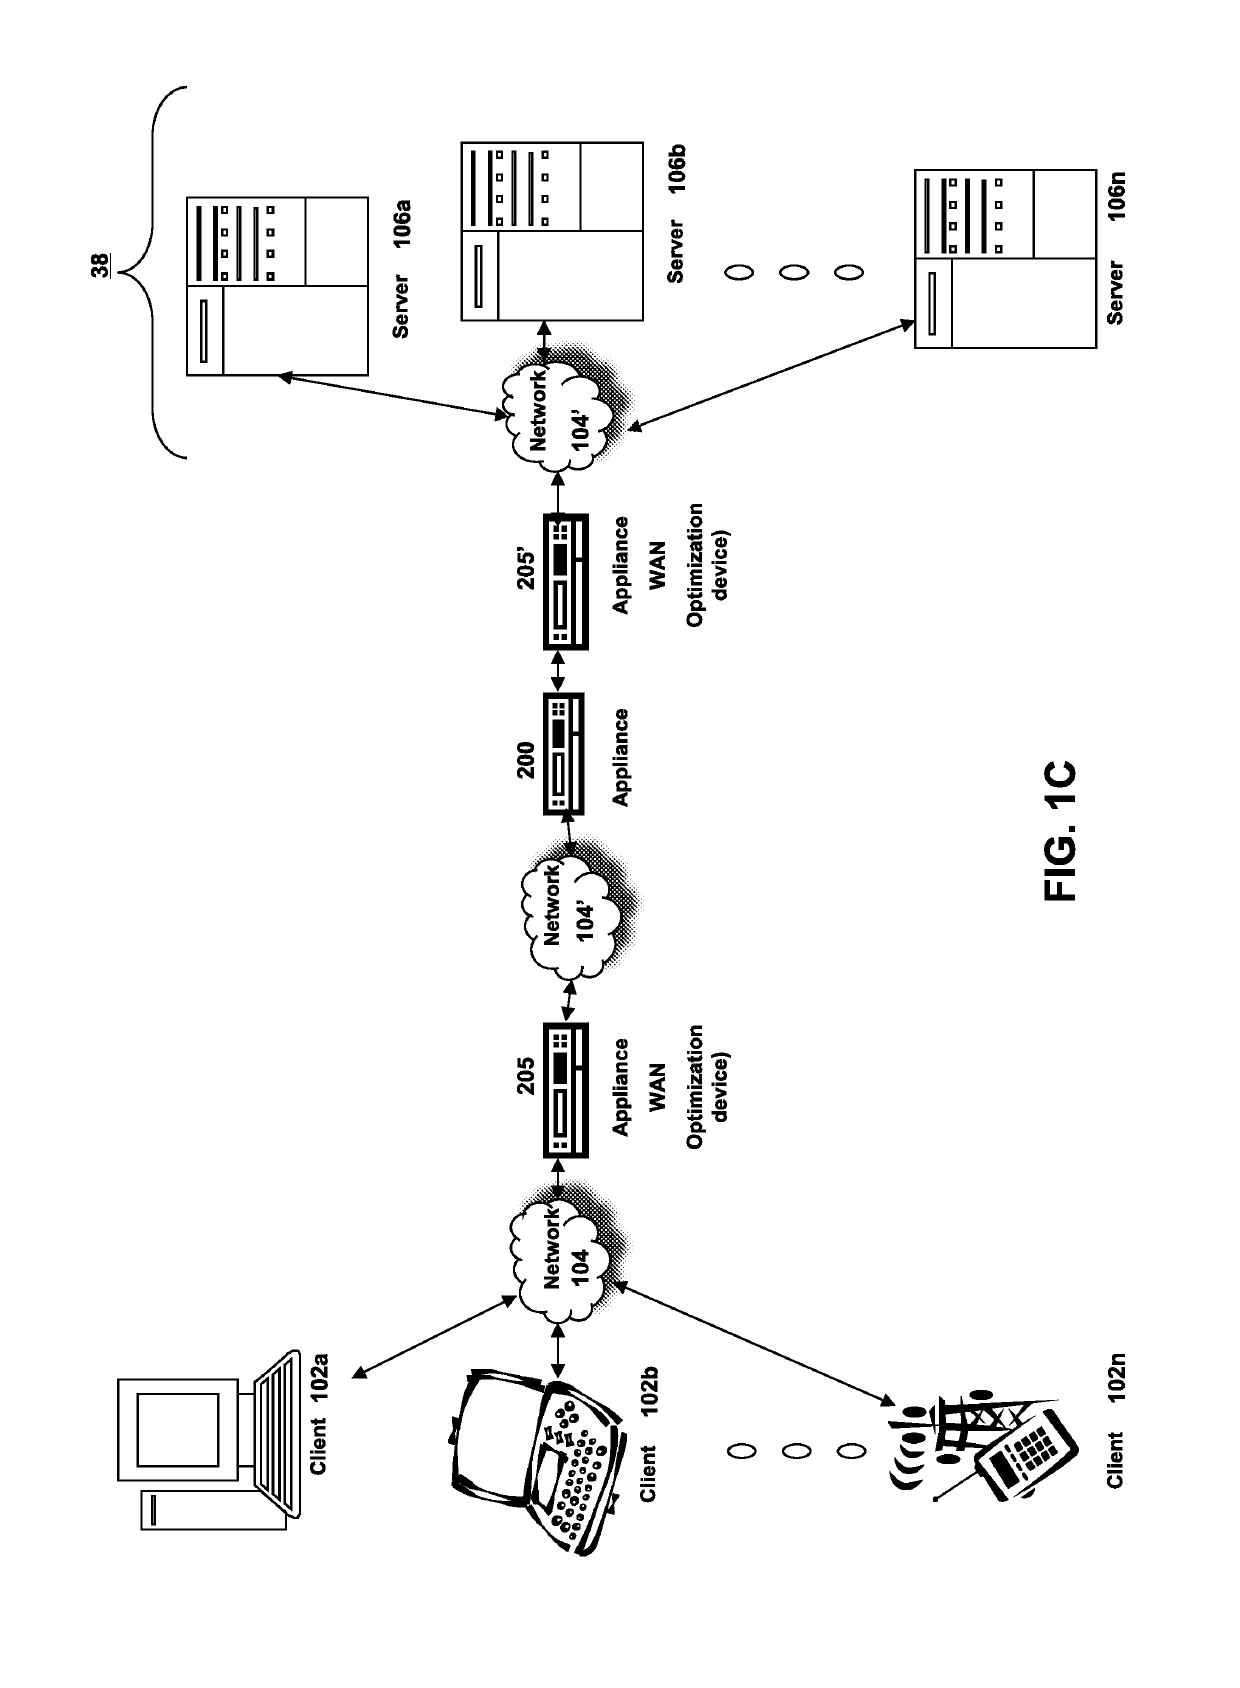 Combining internet routing information with access logs to assess risk of user exposure